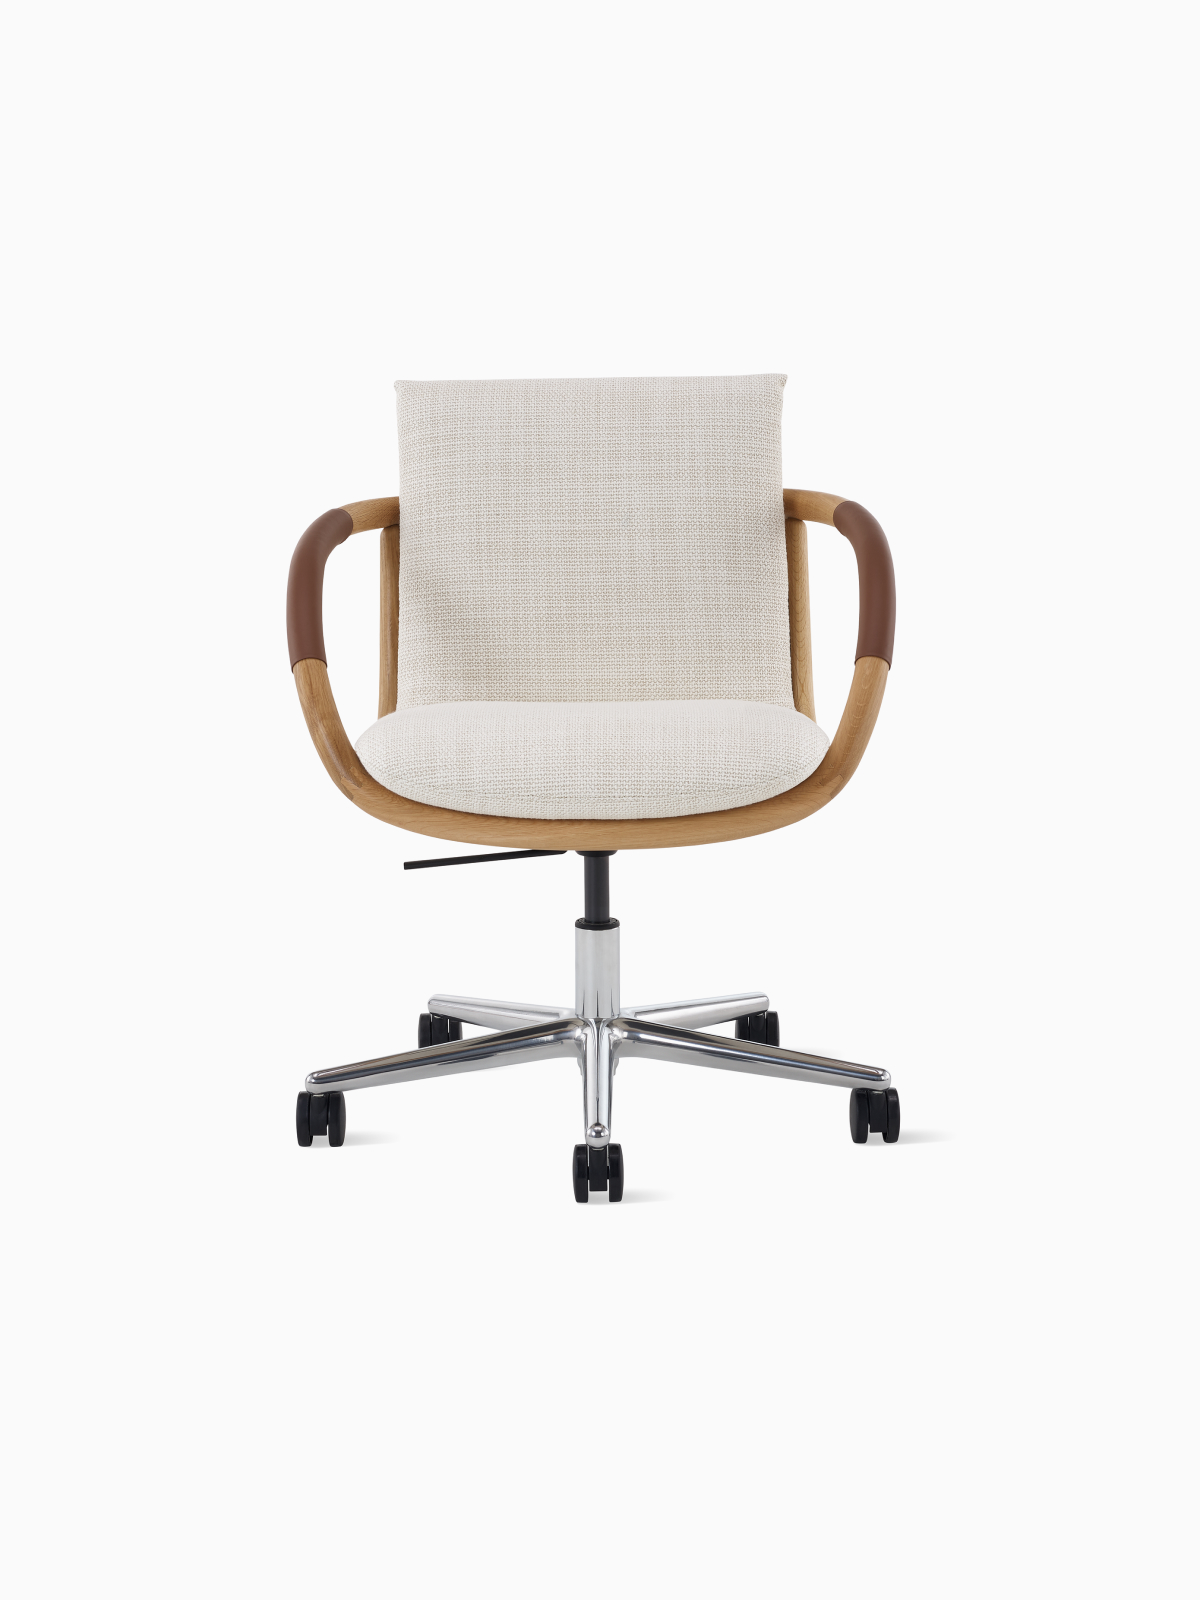 https://www.hermanmiller.com/content/dam/hmicom/page_assets/products/full_loop_chair/th_prd_full_loop_chair_office_seating_fn.jpg